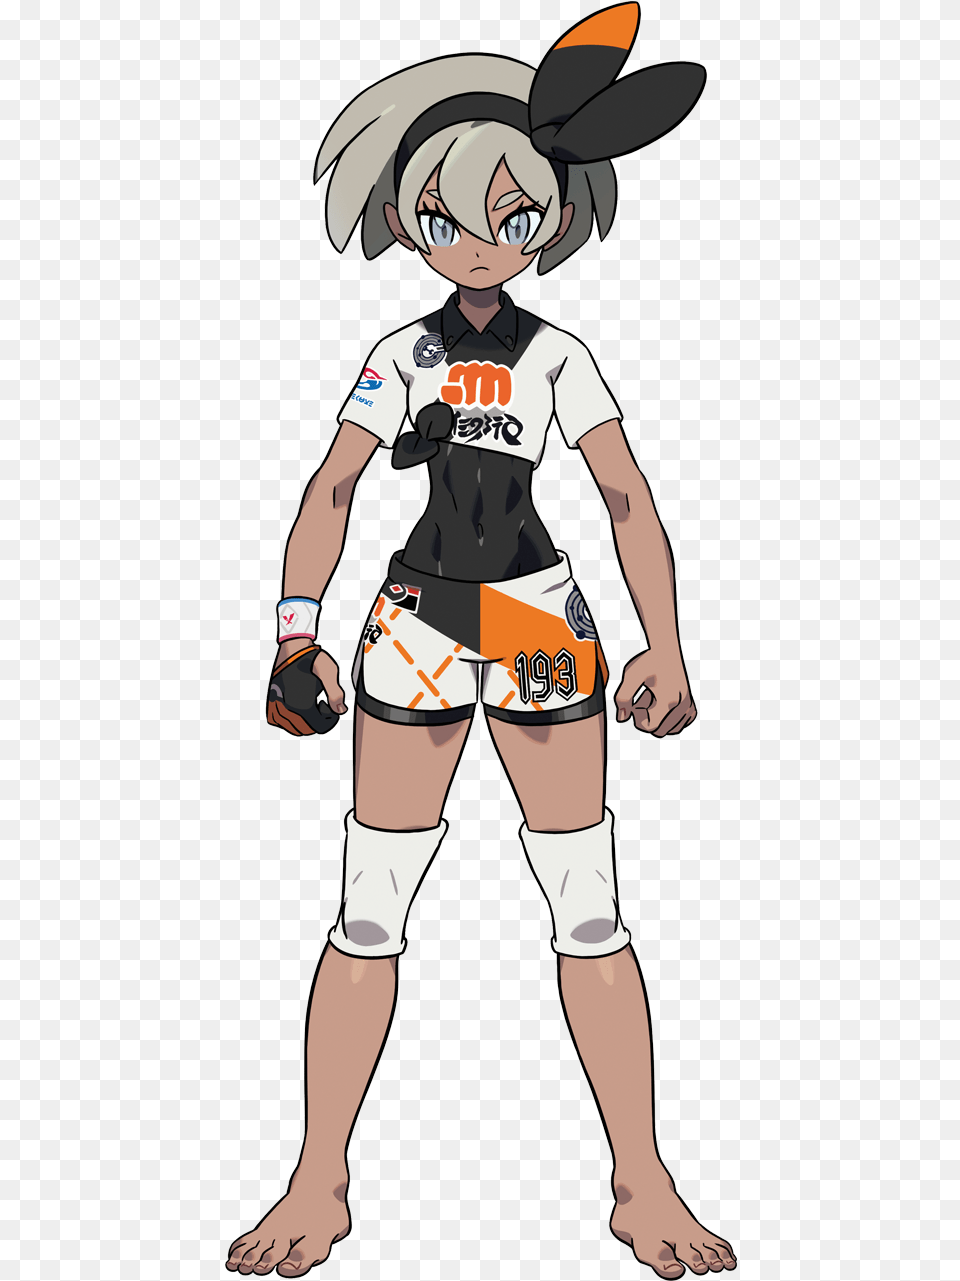 Bea Pokemon Sword And Shield Bea, Book, Clothing, Comics, Person Png